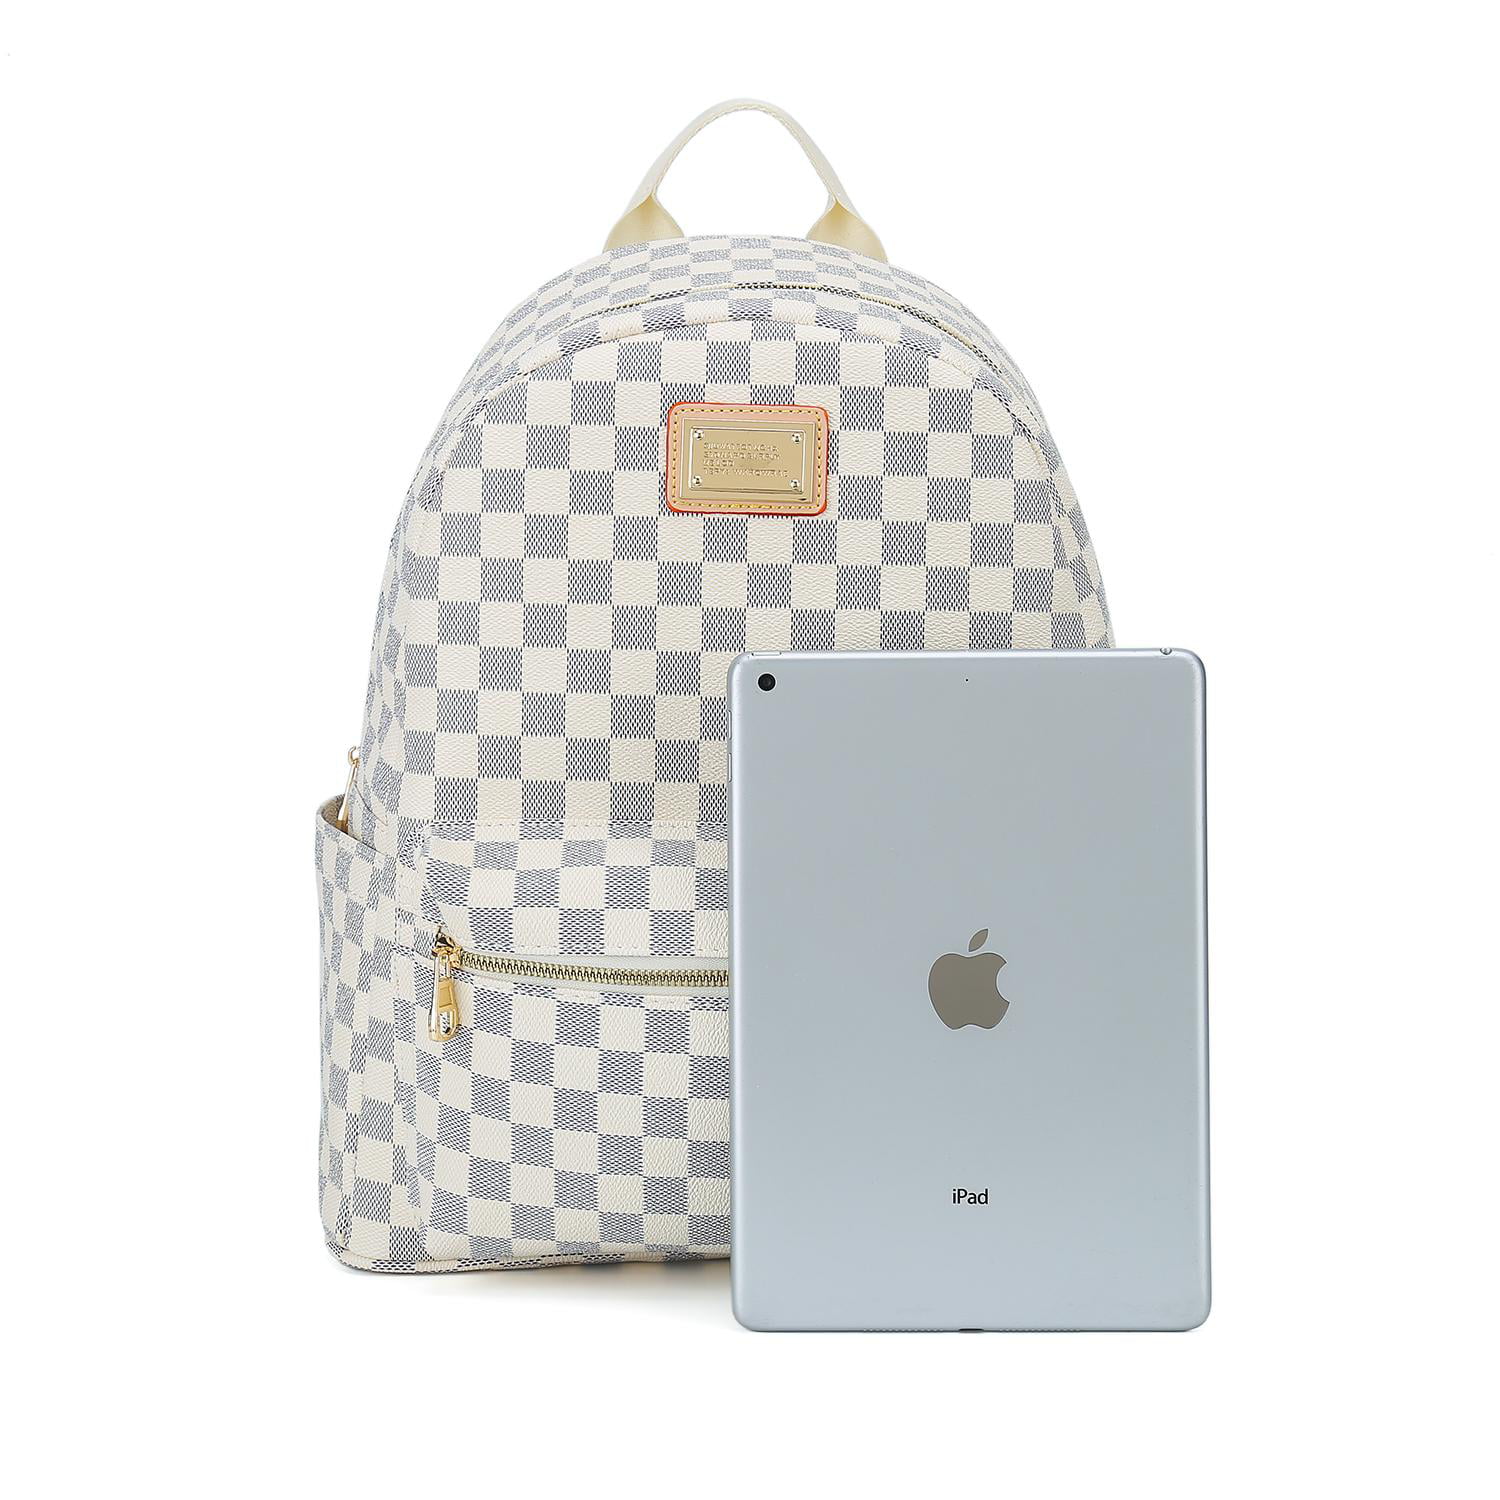 MK Gdledy Checkered Backpack Fashion Classic Large Backpack for College  Students Travel bag White 